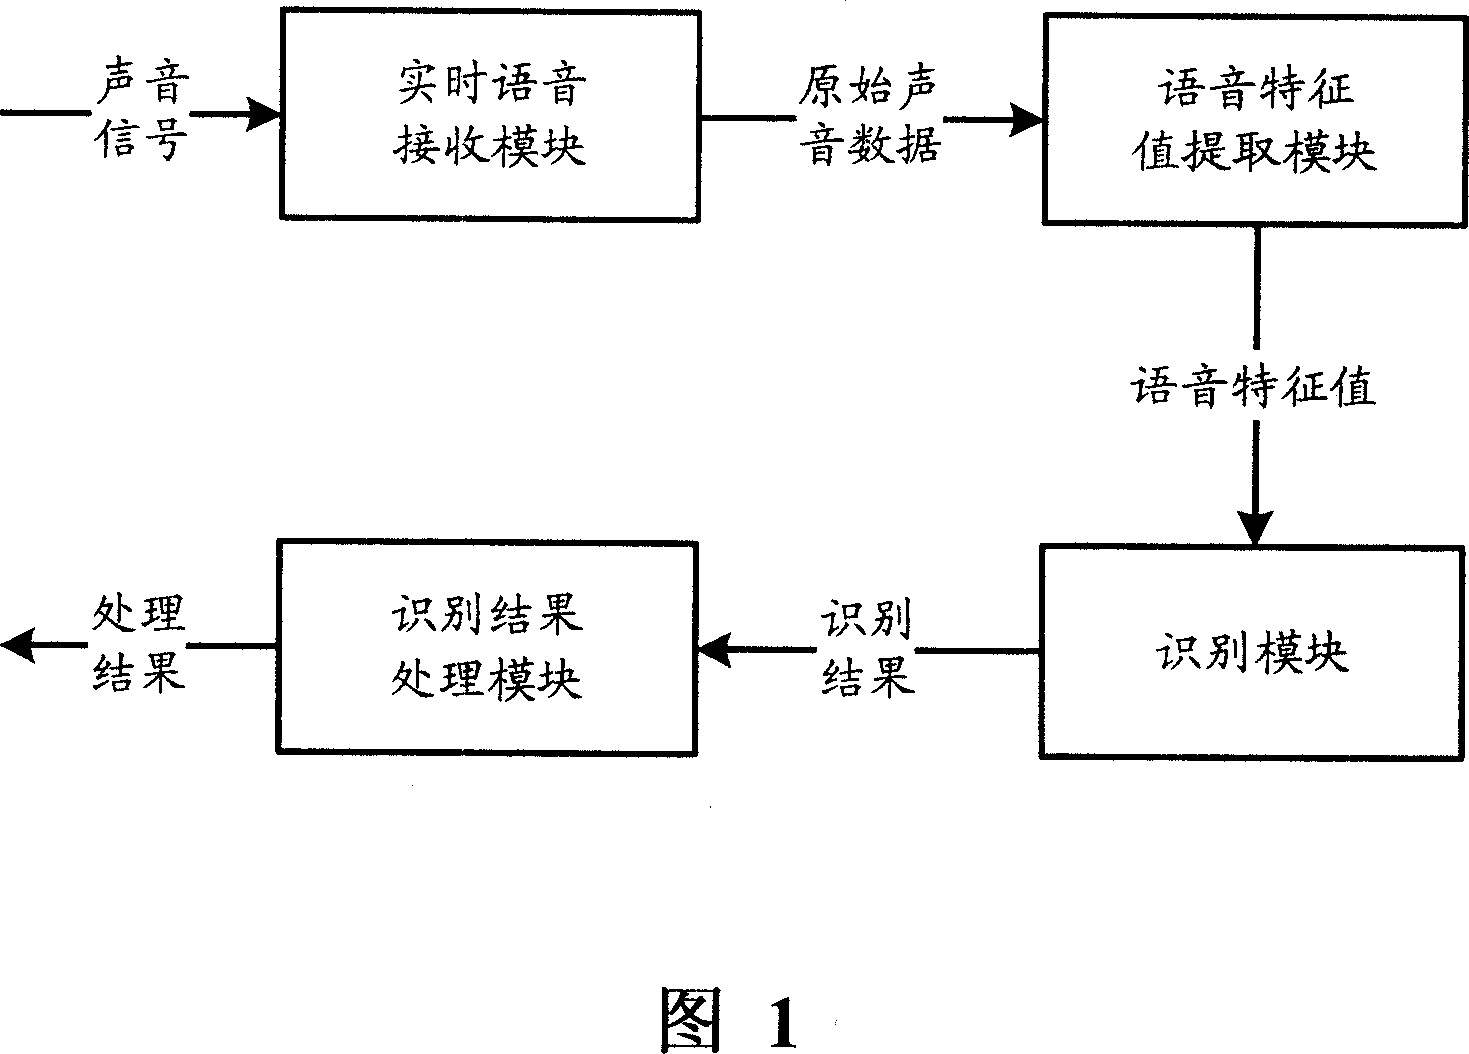 Model training method for unspecified person alone word, recognition system and recognition method